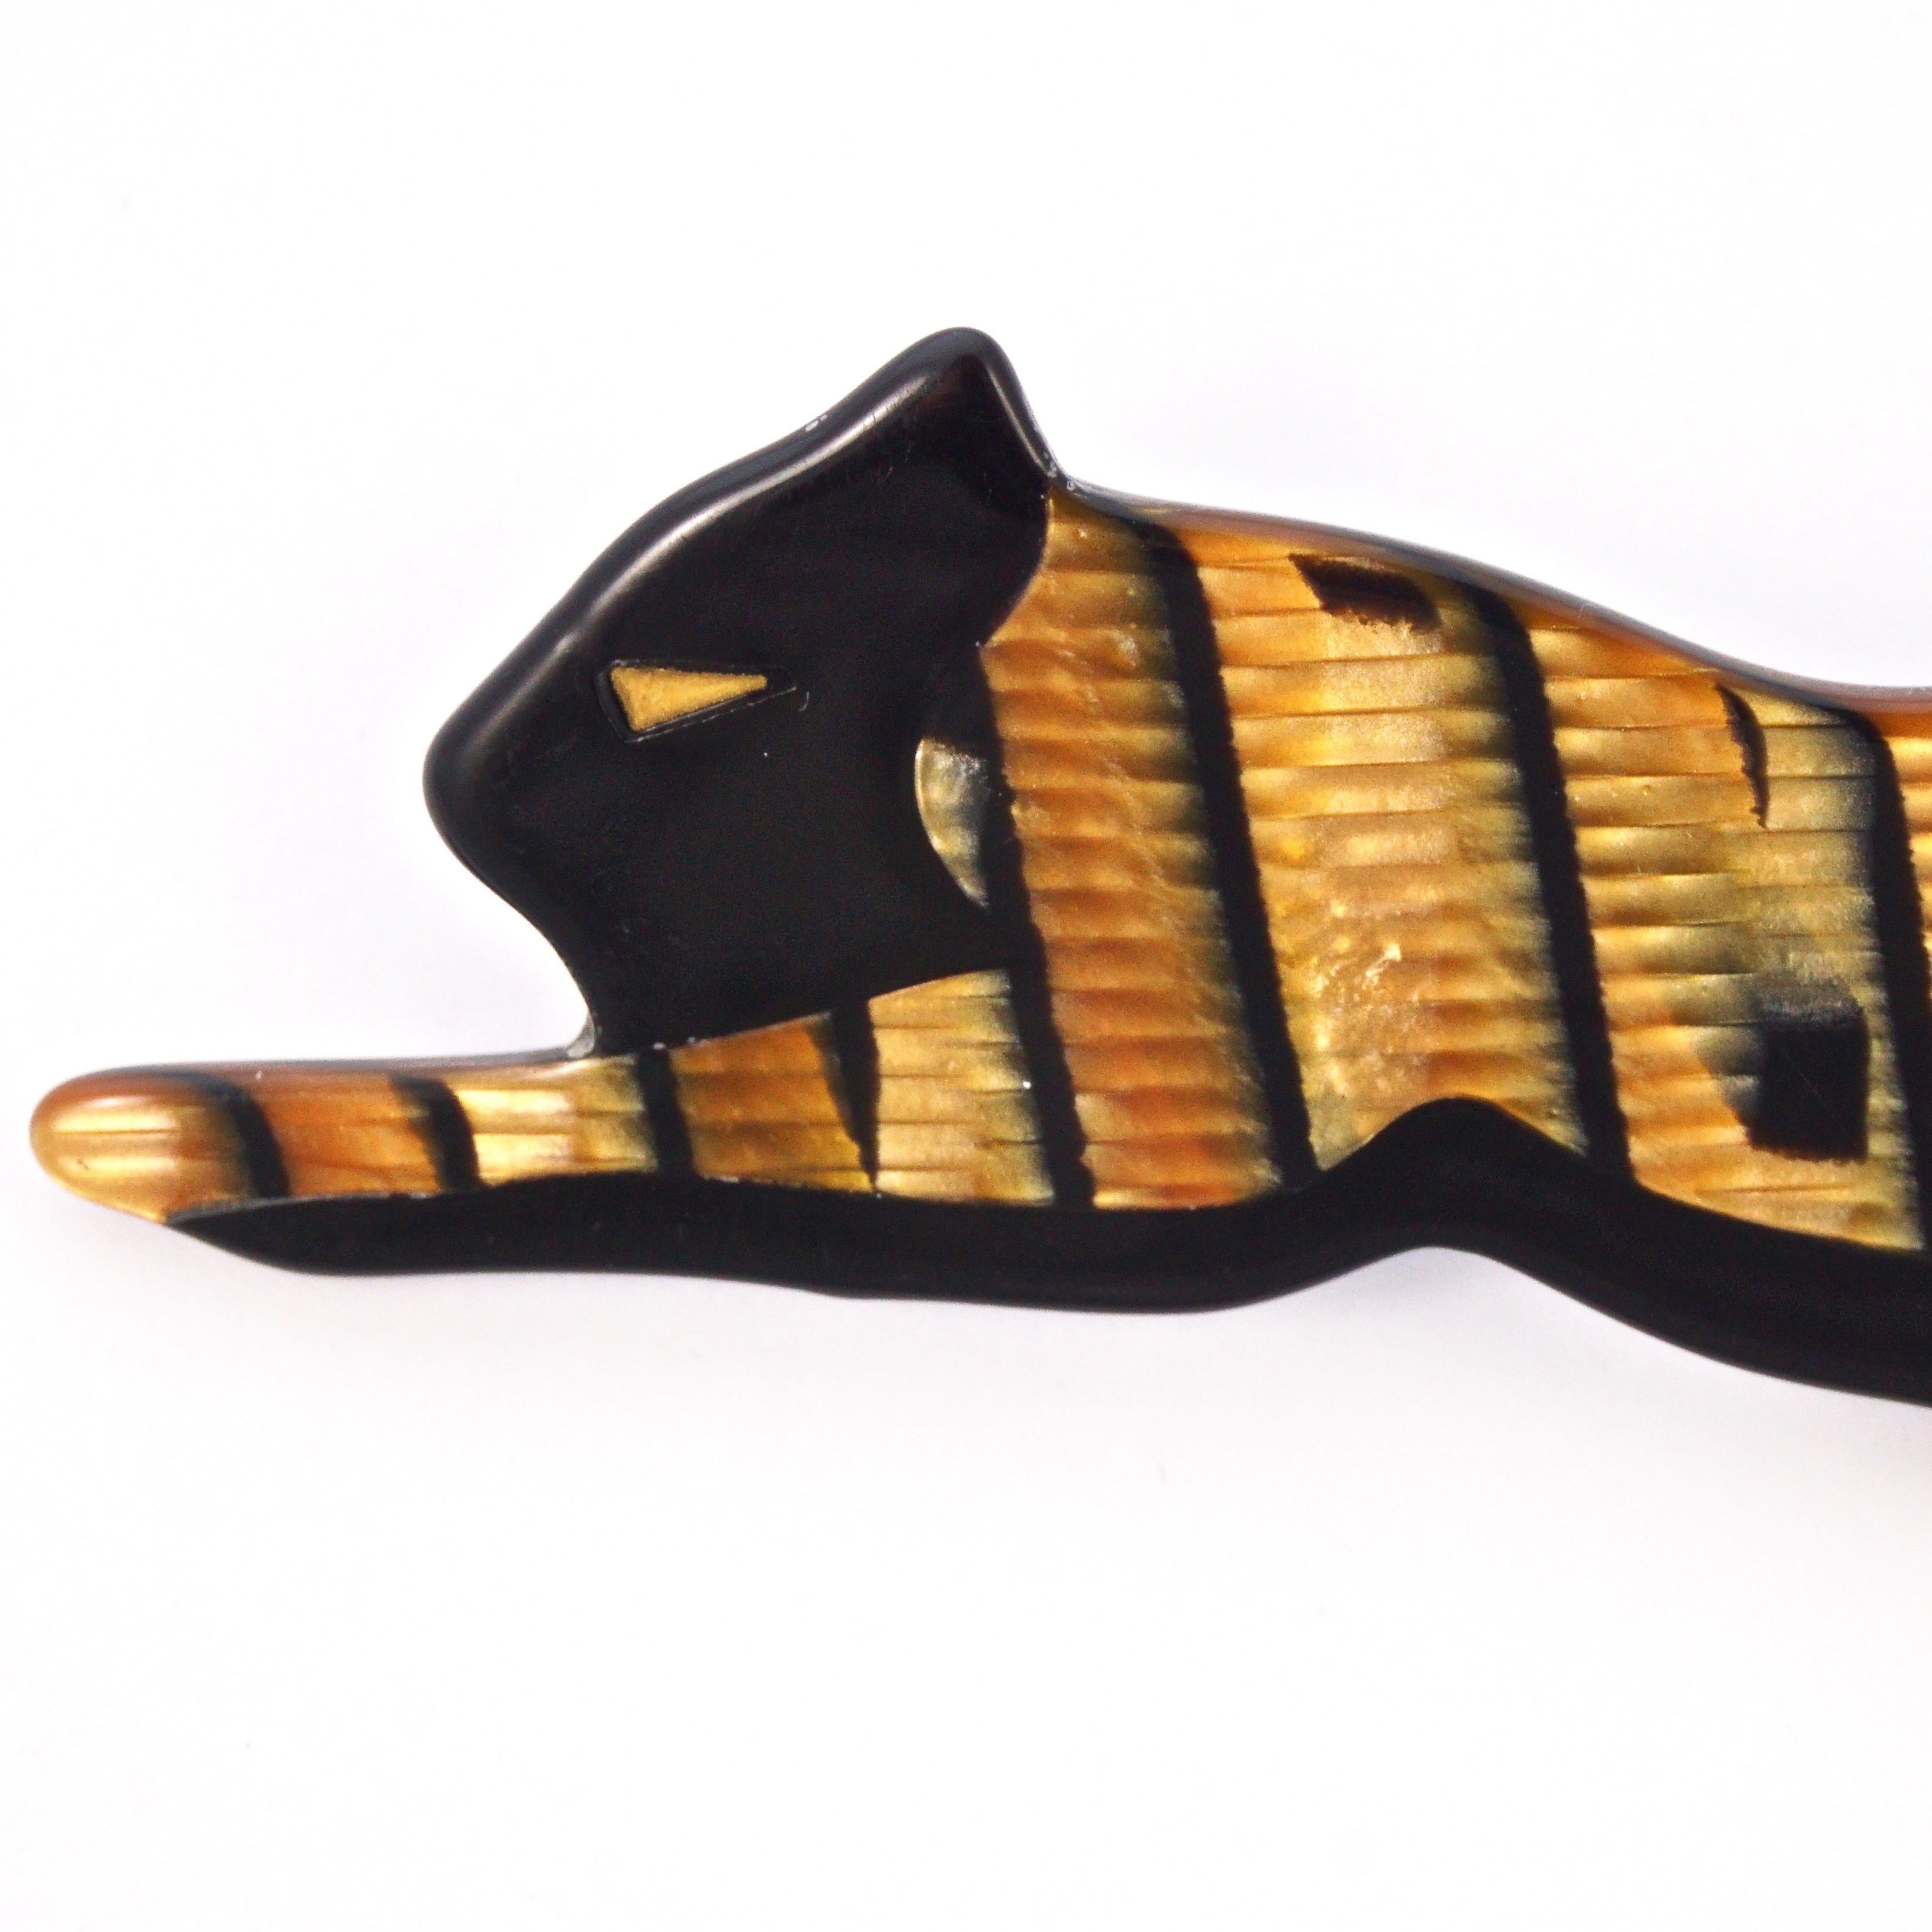 Lea Stein panther brooch in a wonderful iridescent gold and black design. The brooch is made from layered plastic, and measures approximately length 10.5cm / 4.1 inches by width 3.5cm / 1.37 inches.

This is a beautiful collectable iridescent gold